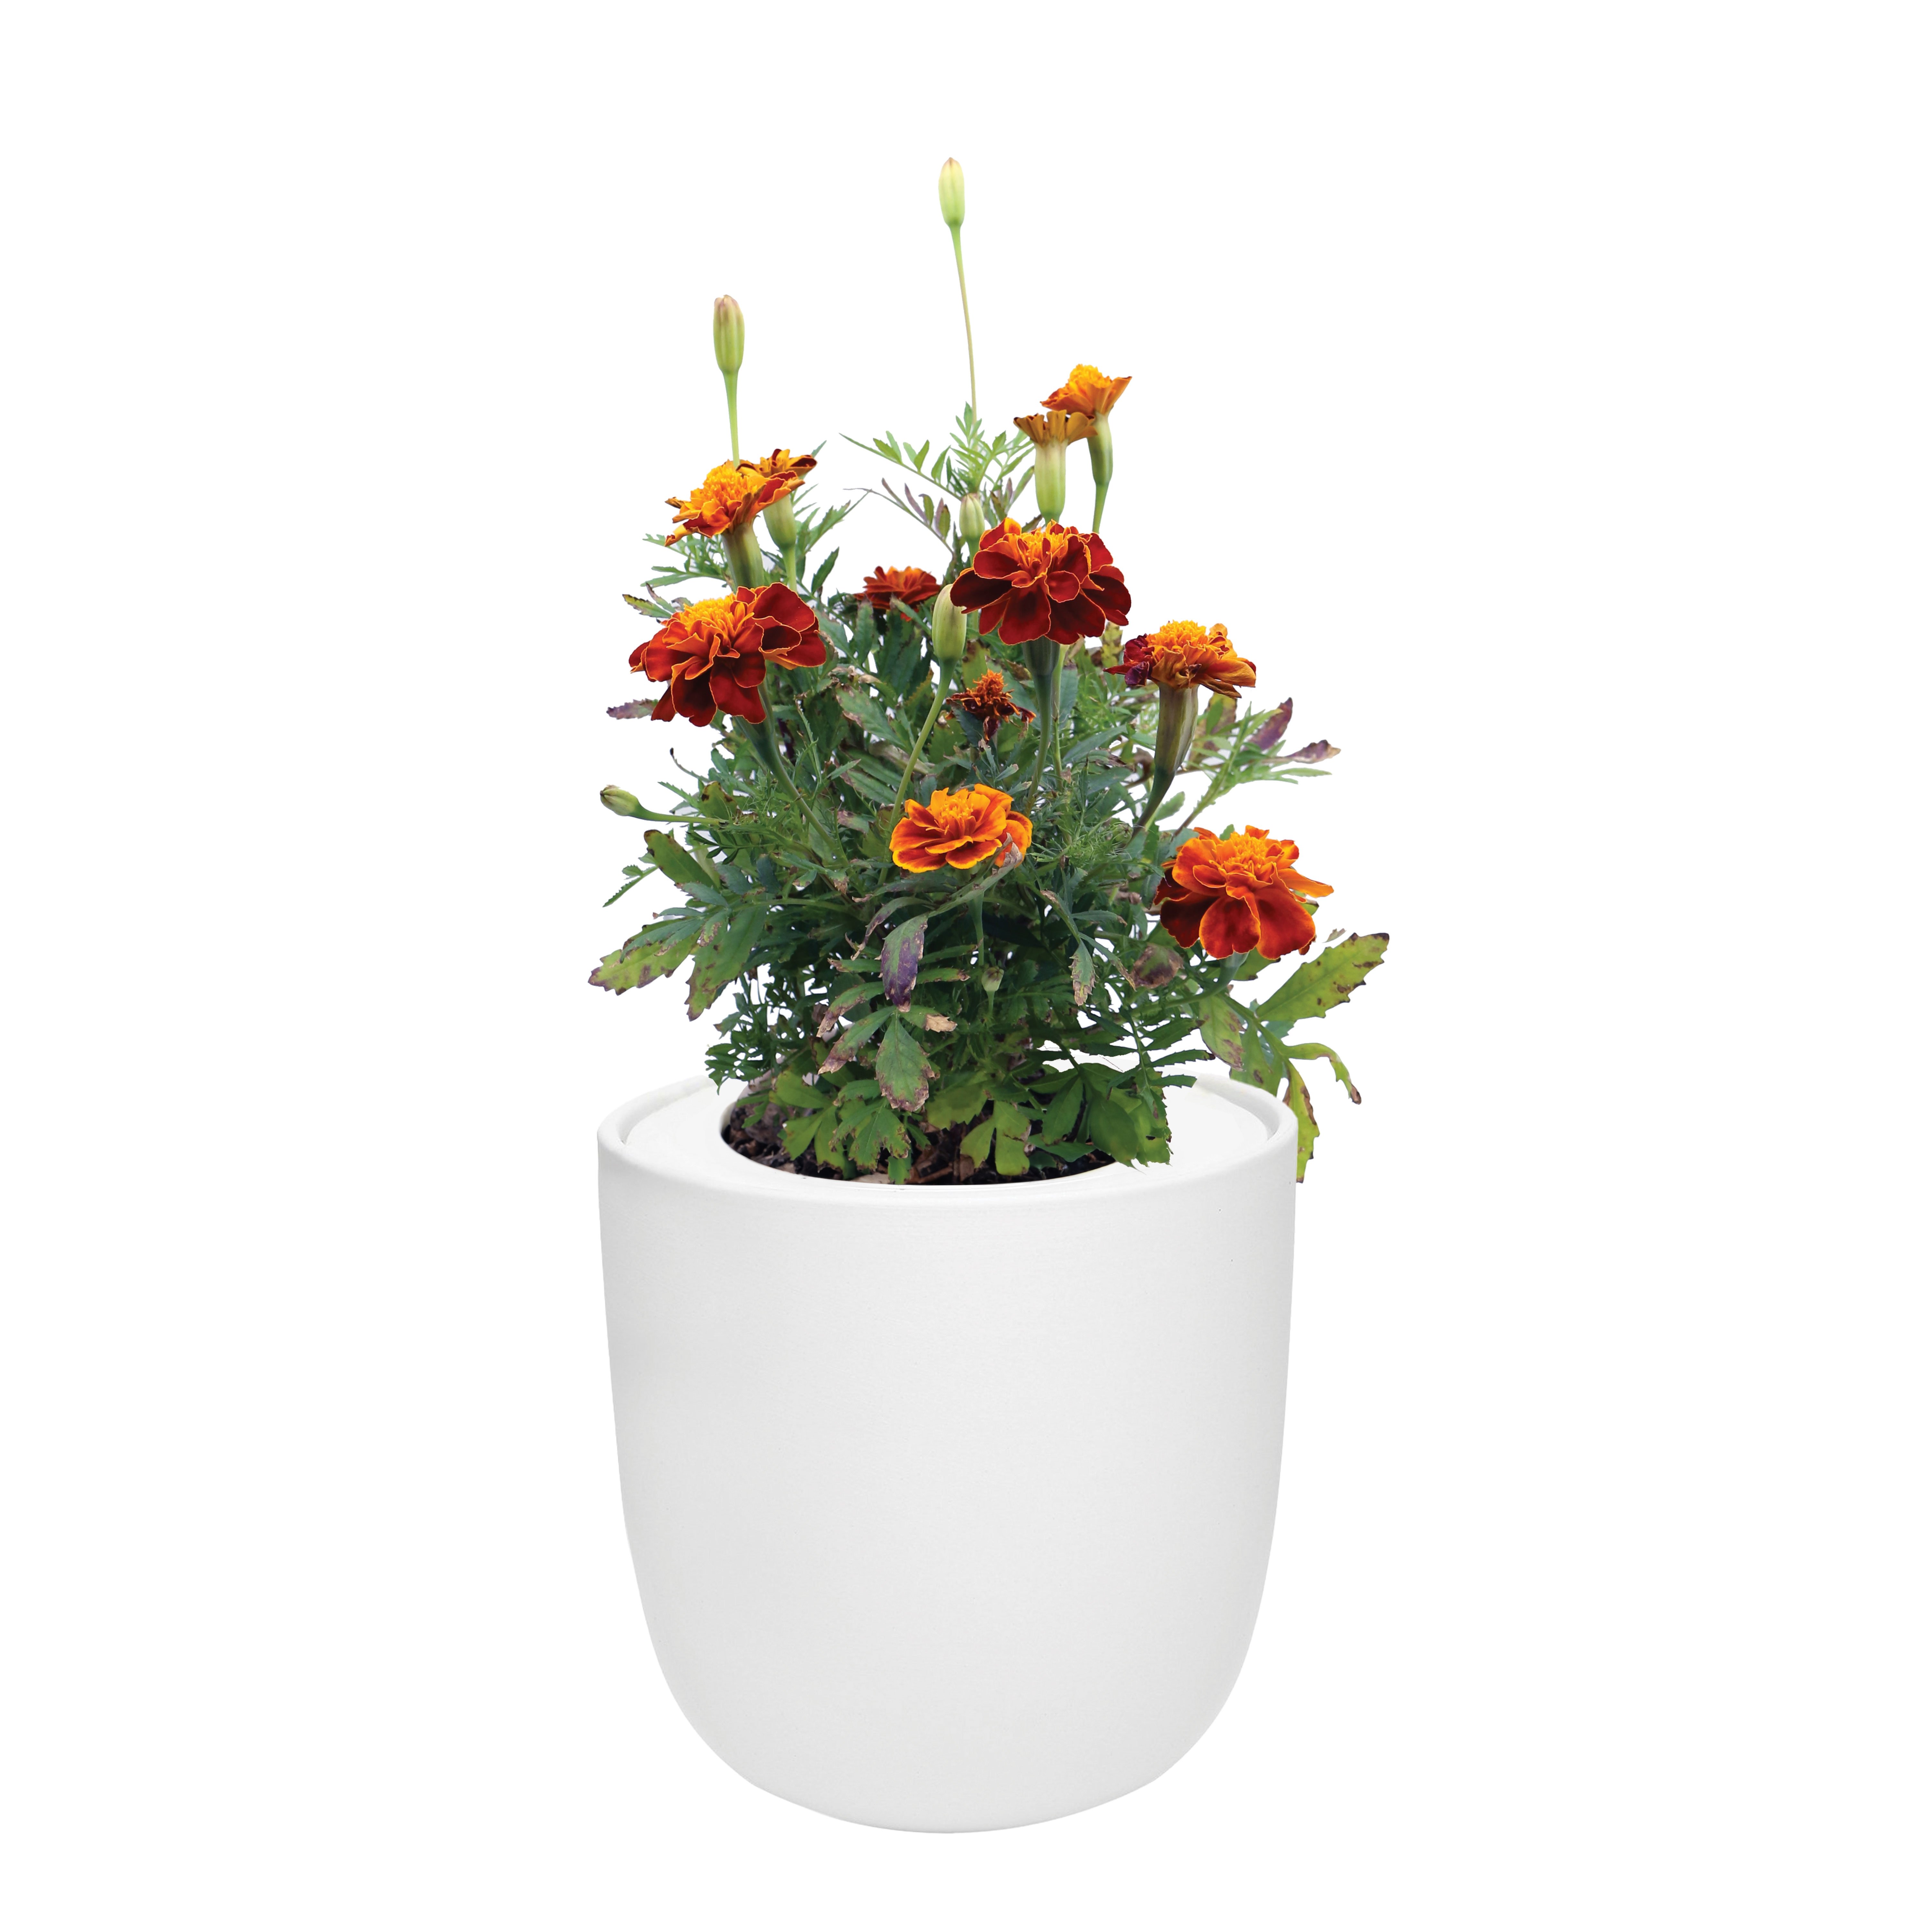 Hydroponic Growing Kit with White Ceramic Pot and Seeds - Marigold (French Double Dwarf)